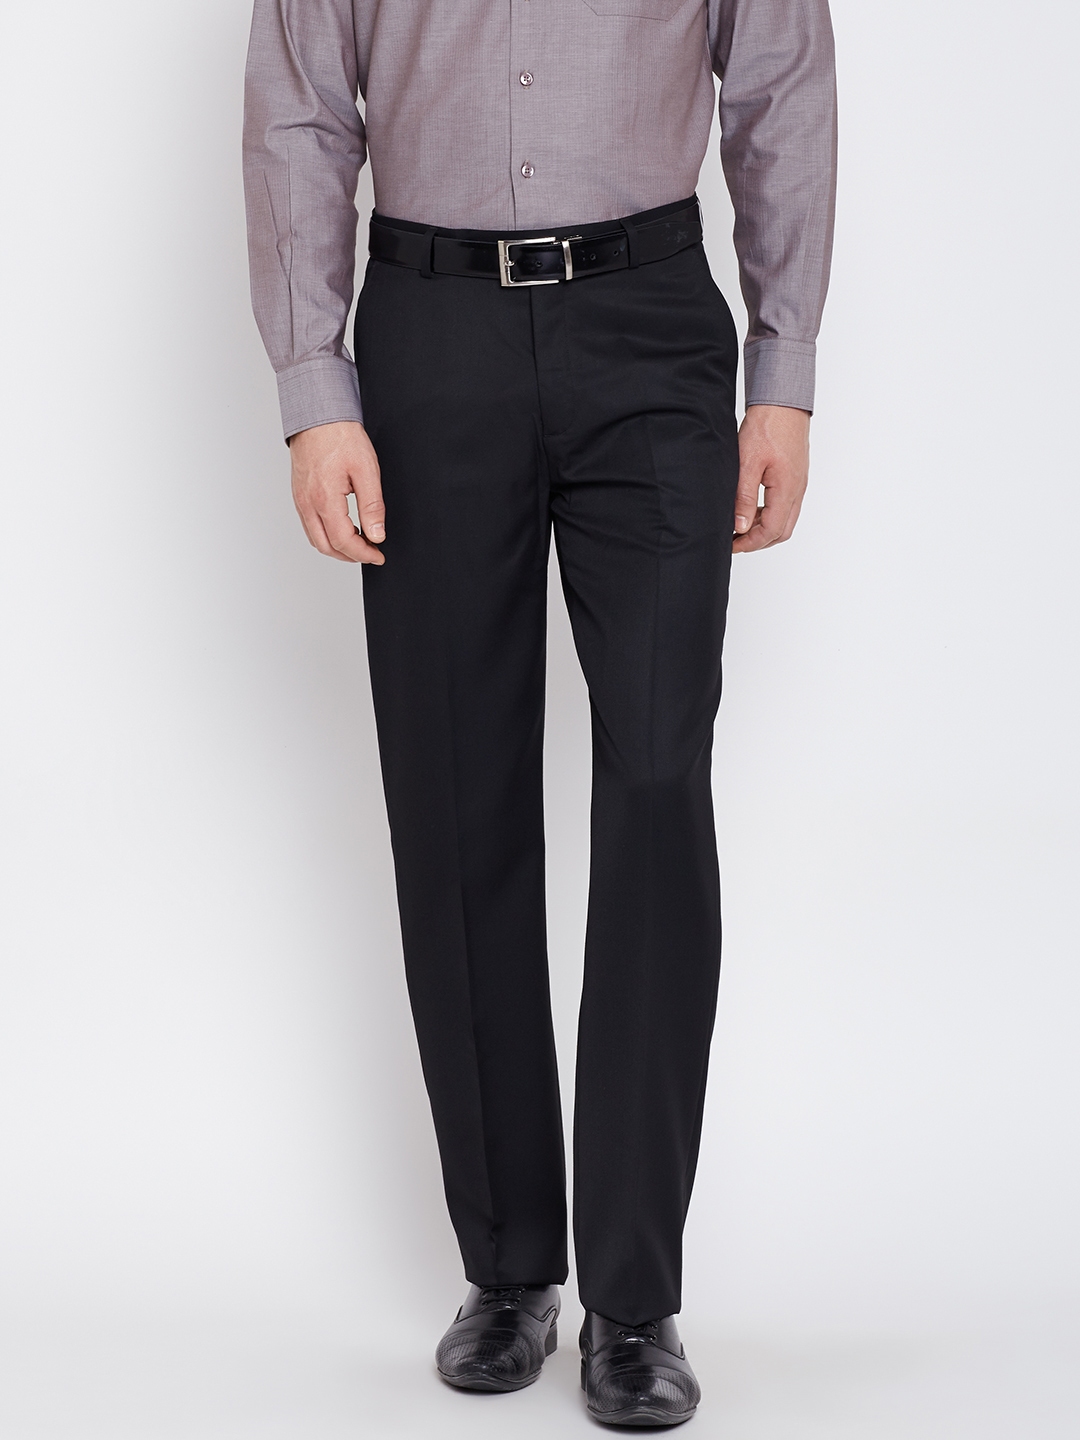 Buy WILLS LIFESTYLE Mens Slim Fit Solid Formal Trousers  Shoppers Stop